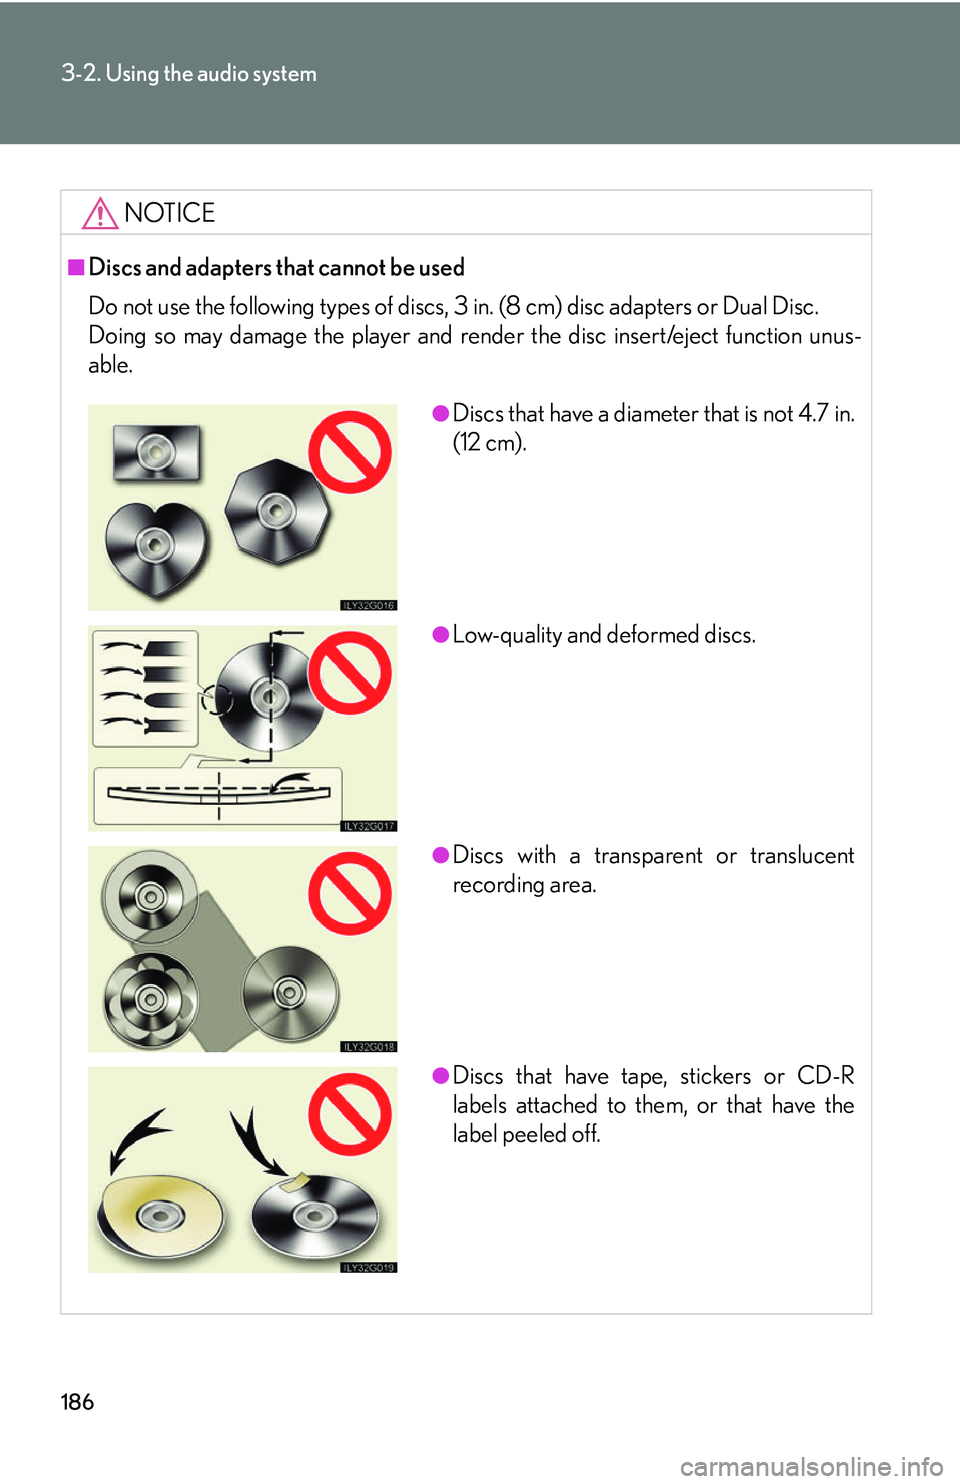 Lexus GX470 2007  Audio/Video System / LEXUS 2007 GX470 OWNERS MANUAL (OM60C64U) 186
3-2. Using the audio system
NOTICE
■Discs and adapters that cannot be used
Do not use the following types of discs, 3 in. (8 cm) disc adapters or Dual Disc.
Doing so may damage the player and re